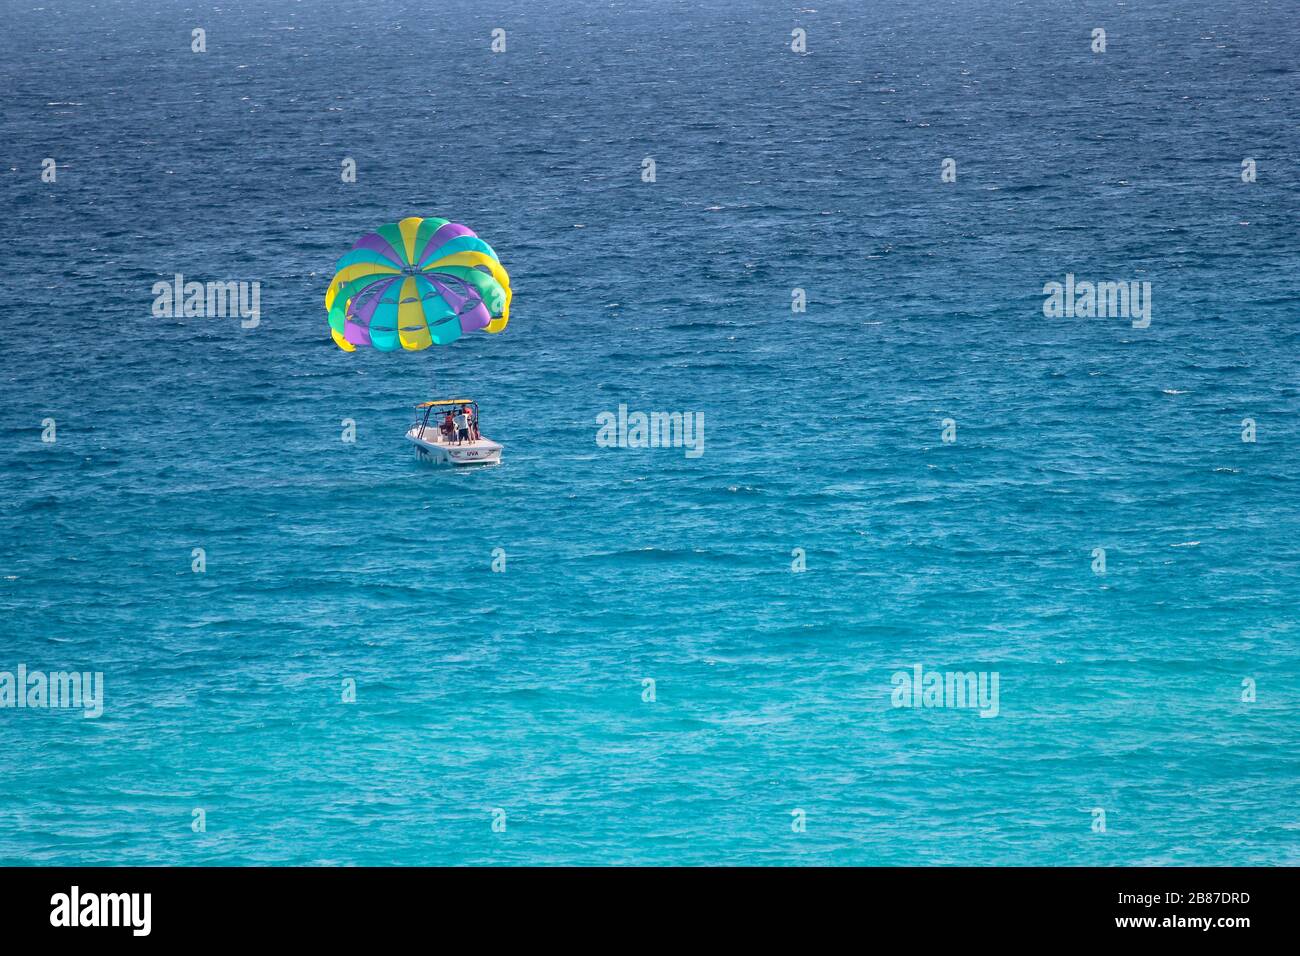 Parasailing boat on the waters of a beach in the Hotel Zone, Cancun, Quintana Roo, Yucatan Peninsula, Mexico Stock Photo